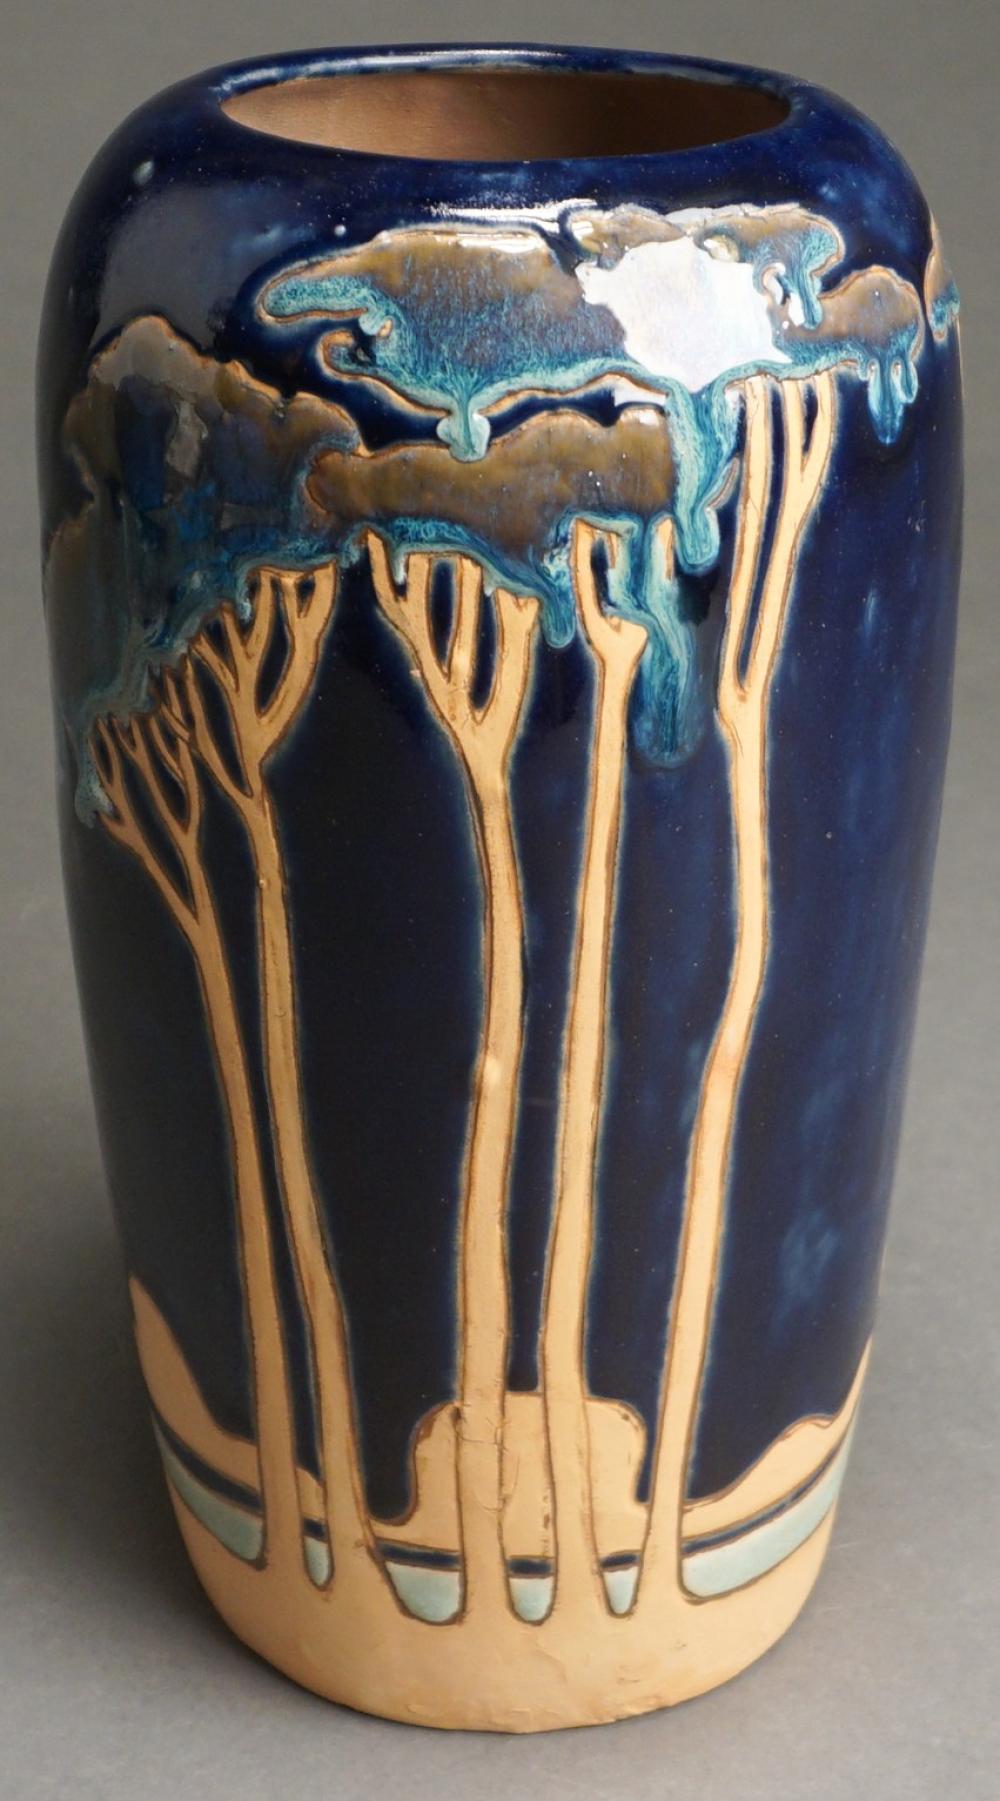 NEWCOMB STYLE DECORATED POTTERY 2e4957